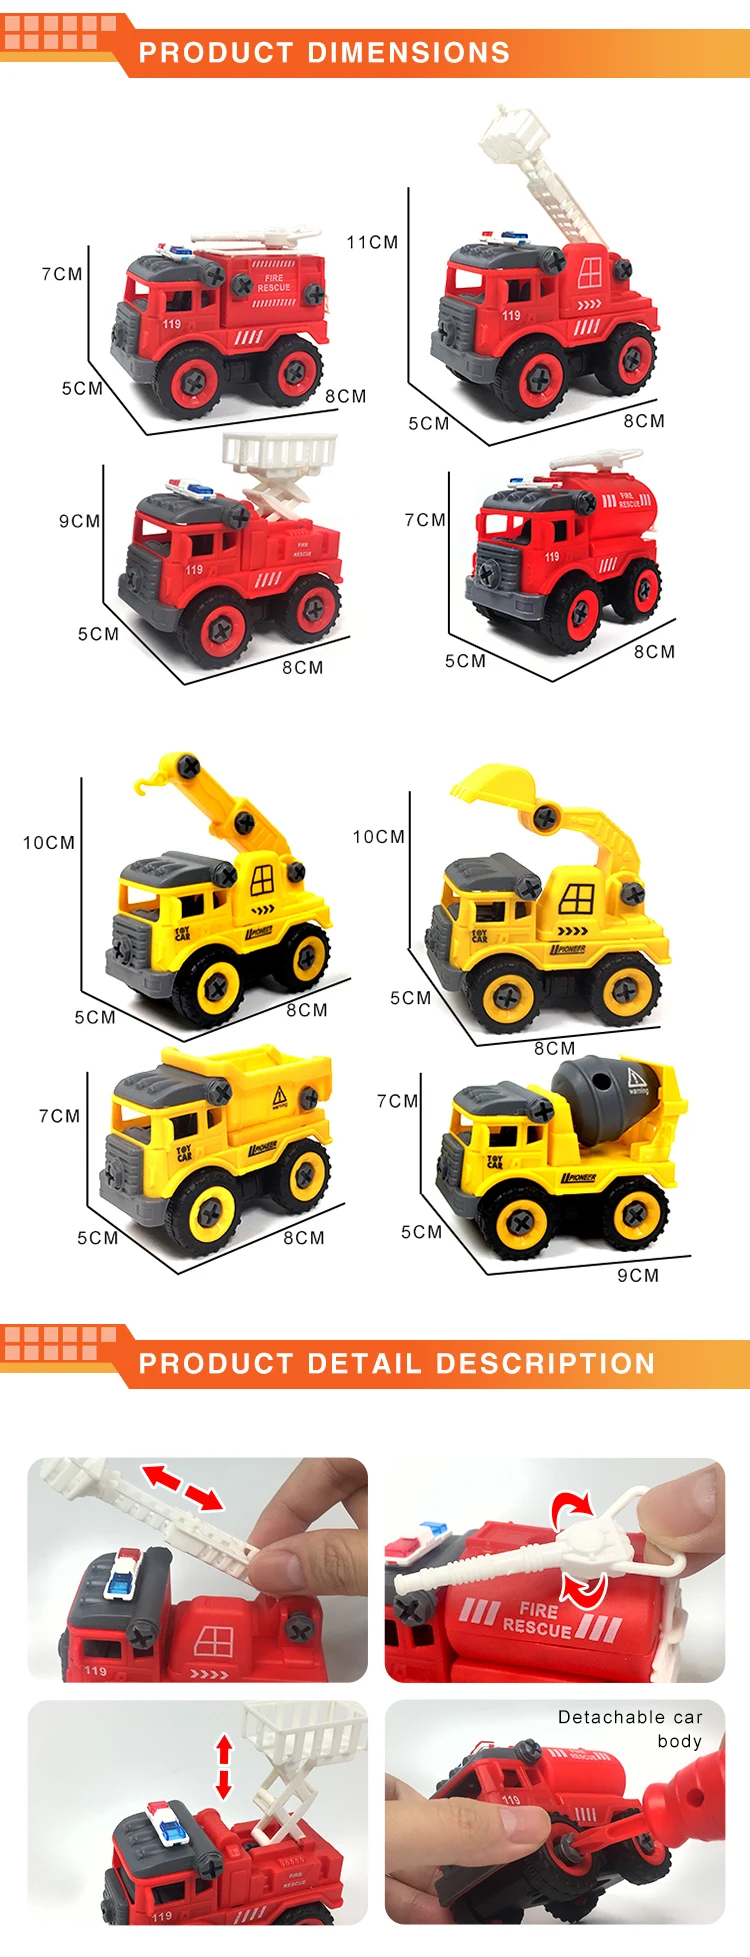 DIY take apart toy disassembling and assembling toy construction vehicles